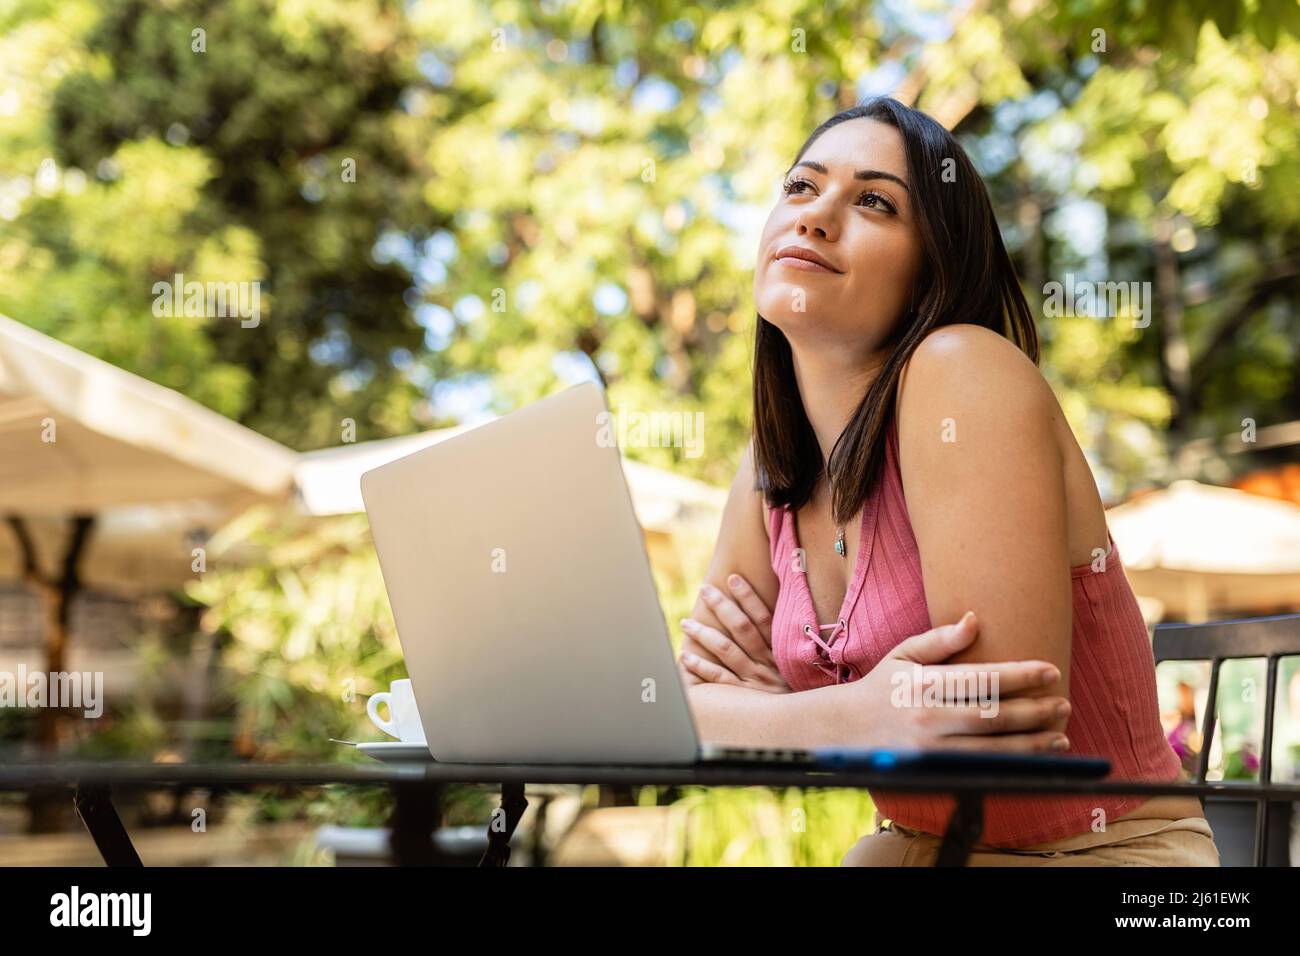 Thoughtful caucasian woman with laptop looking away sitting in outdoors terrace Stock Photo